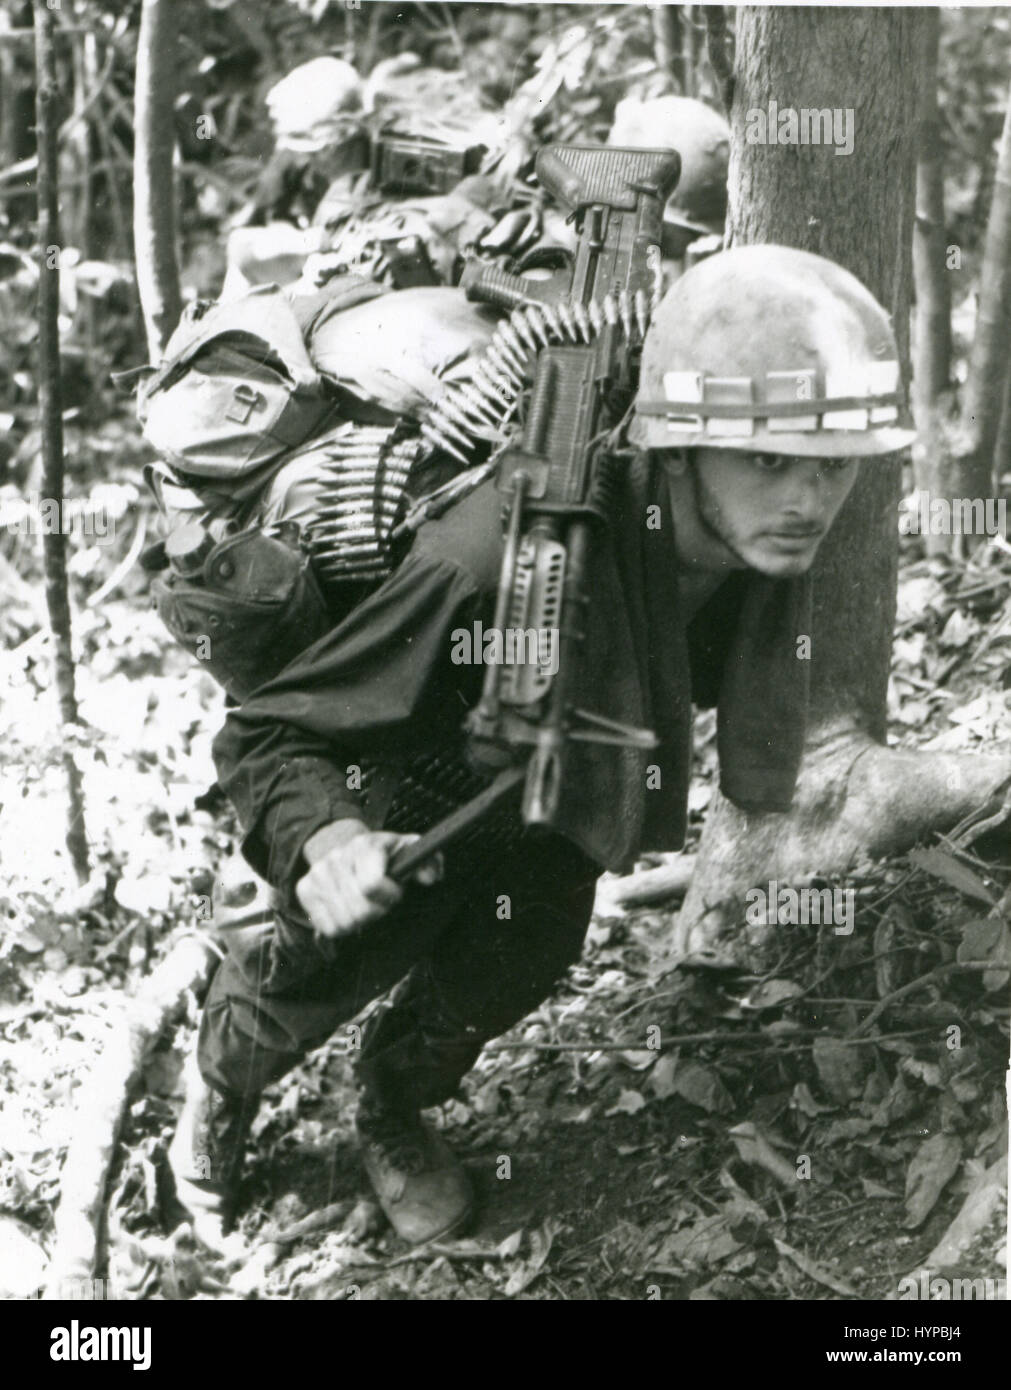 An 8th Inf. Div machine gunner makes his way up a steep slope during a search and destroy mission. The machine gun is an M-60. May 15, 1969. Stock Photo